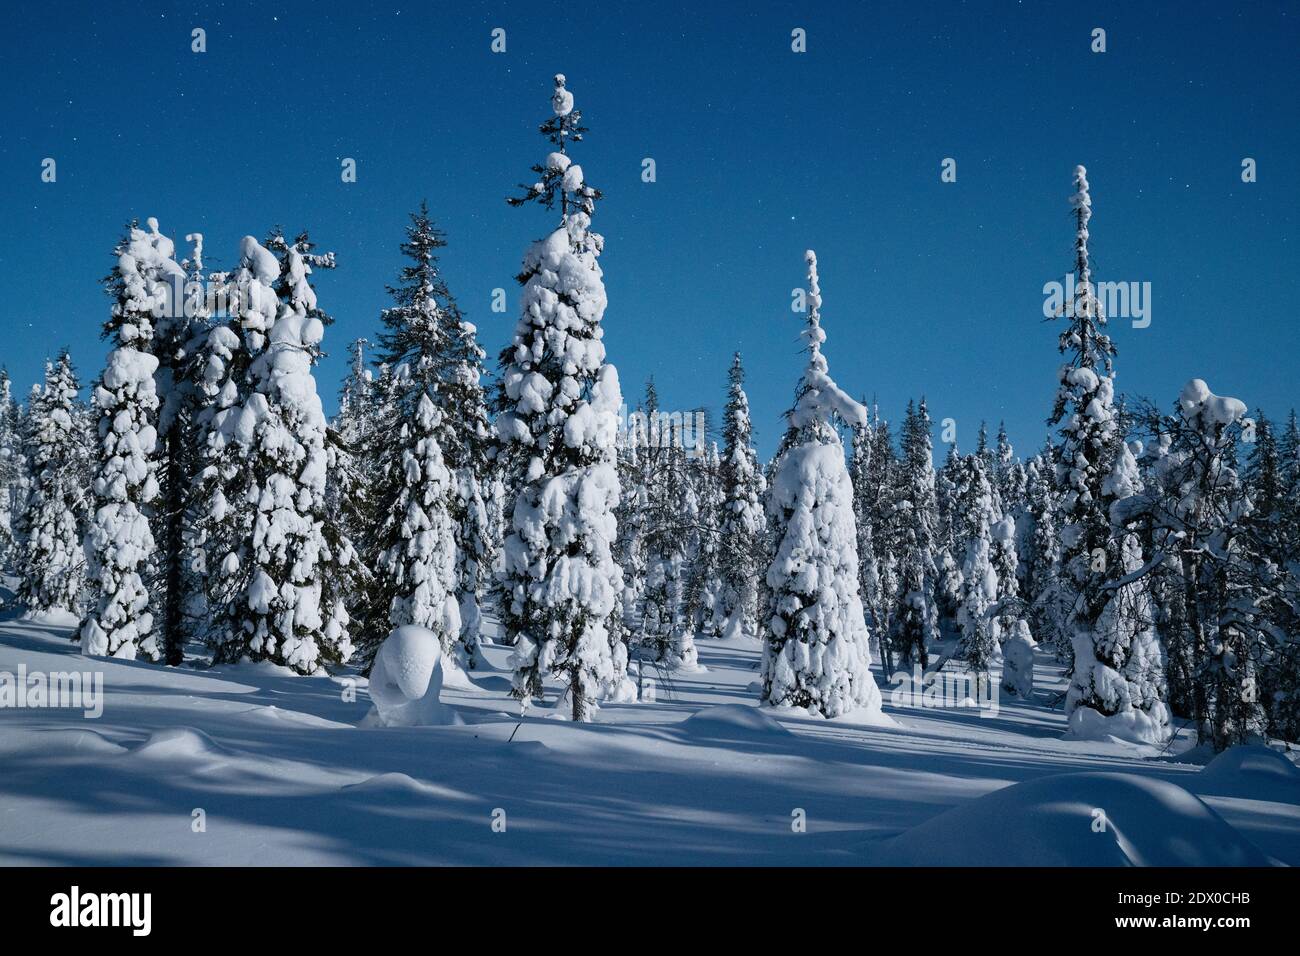 Summery old-growth taiga forest in Riisitunturi National Park, Northern  Finland Stock Photo - Alamy